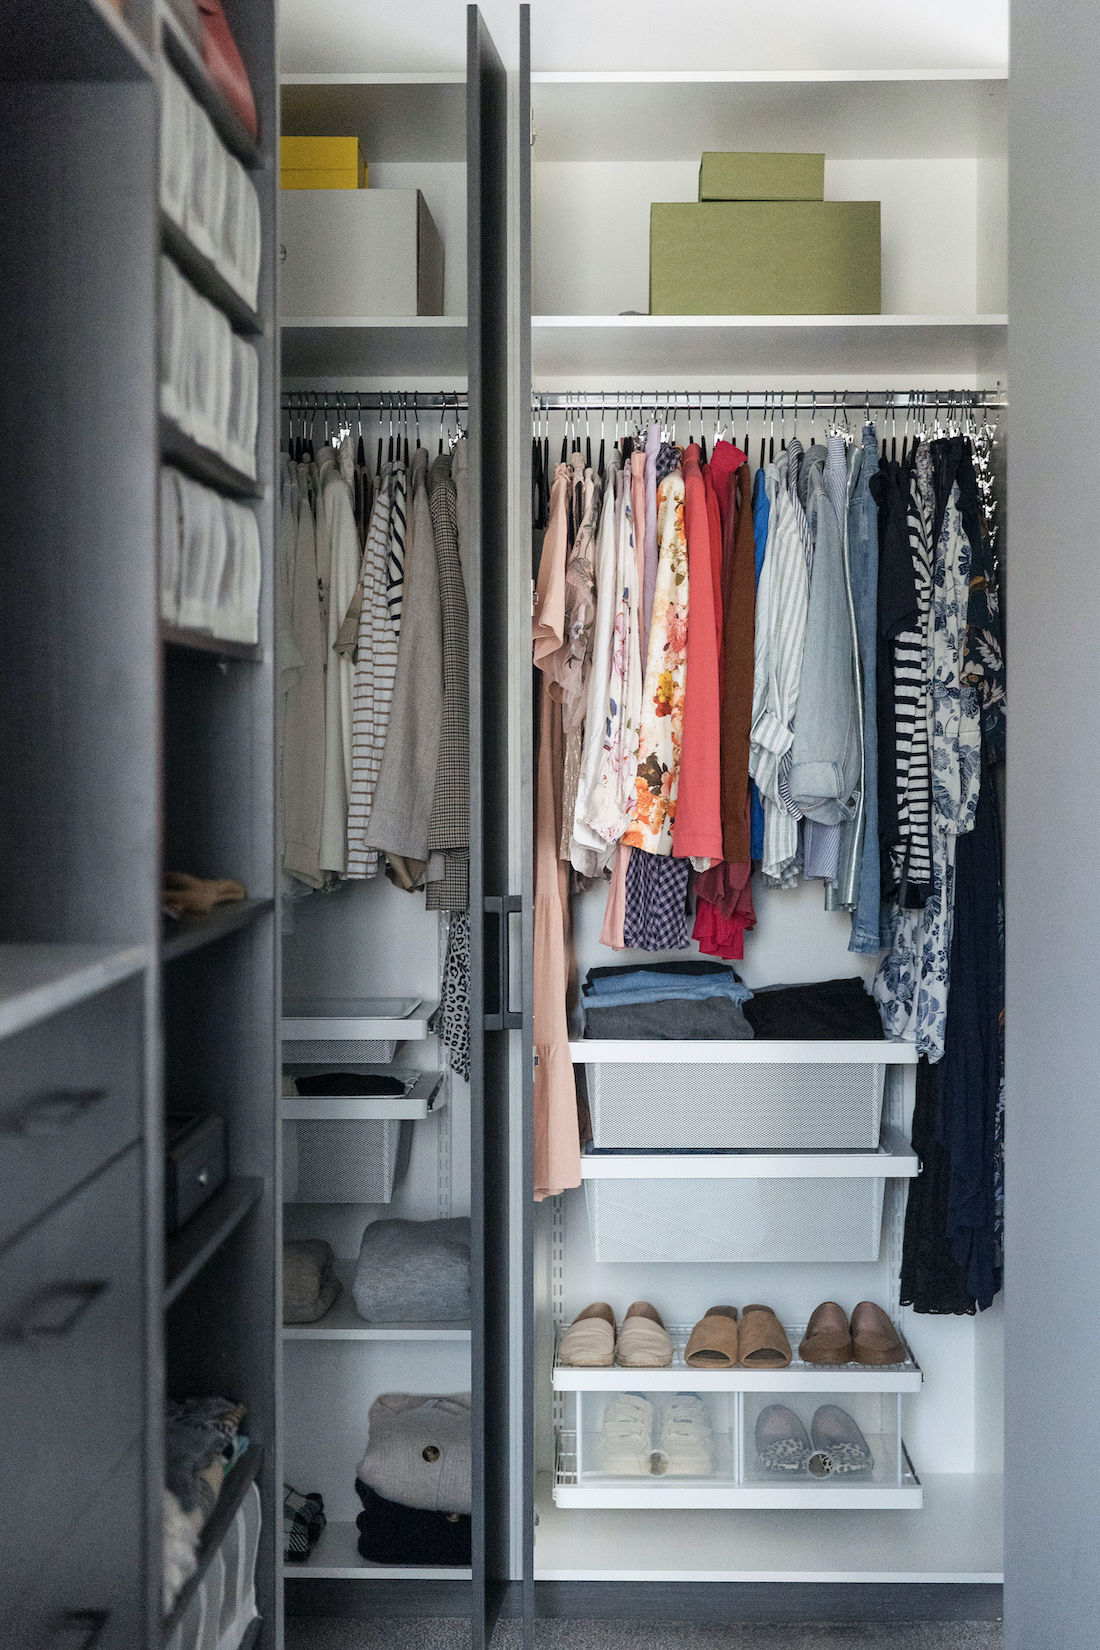 Organising your wardrobe by colour